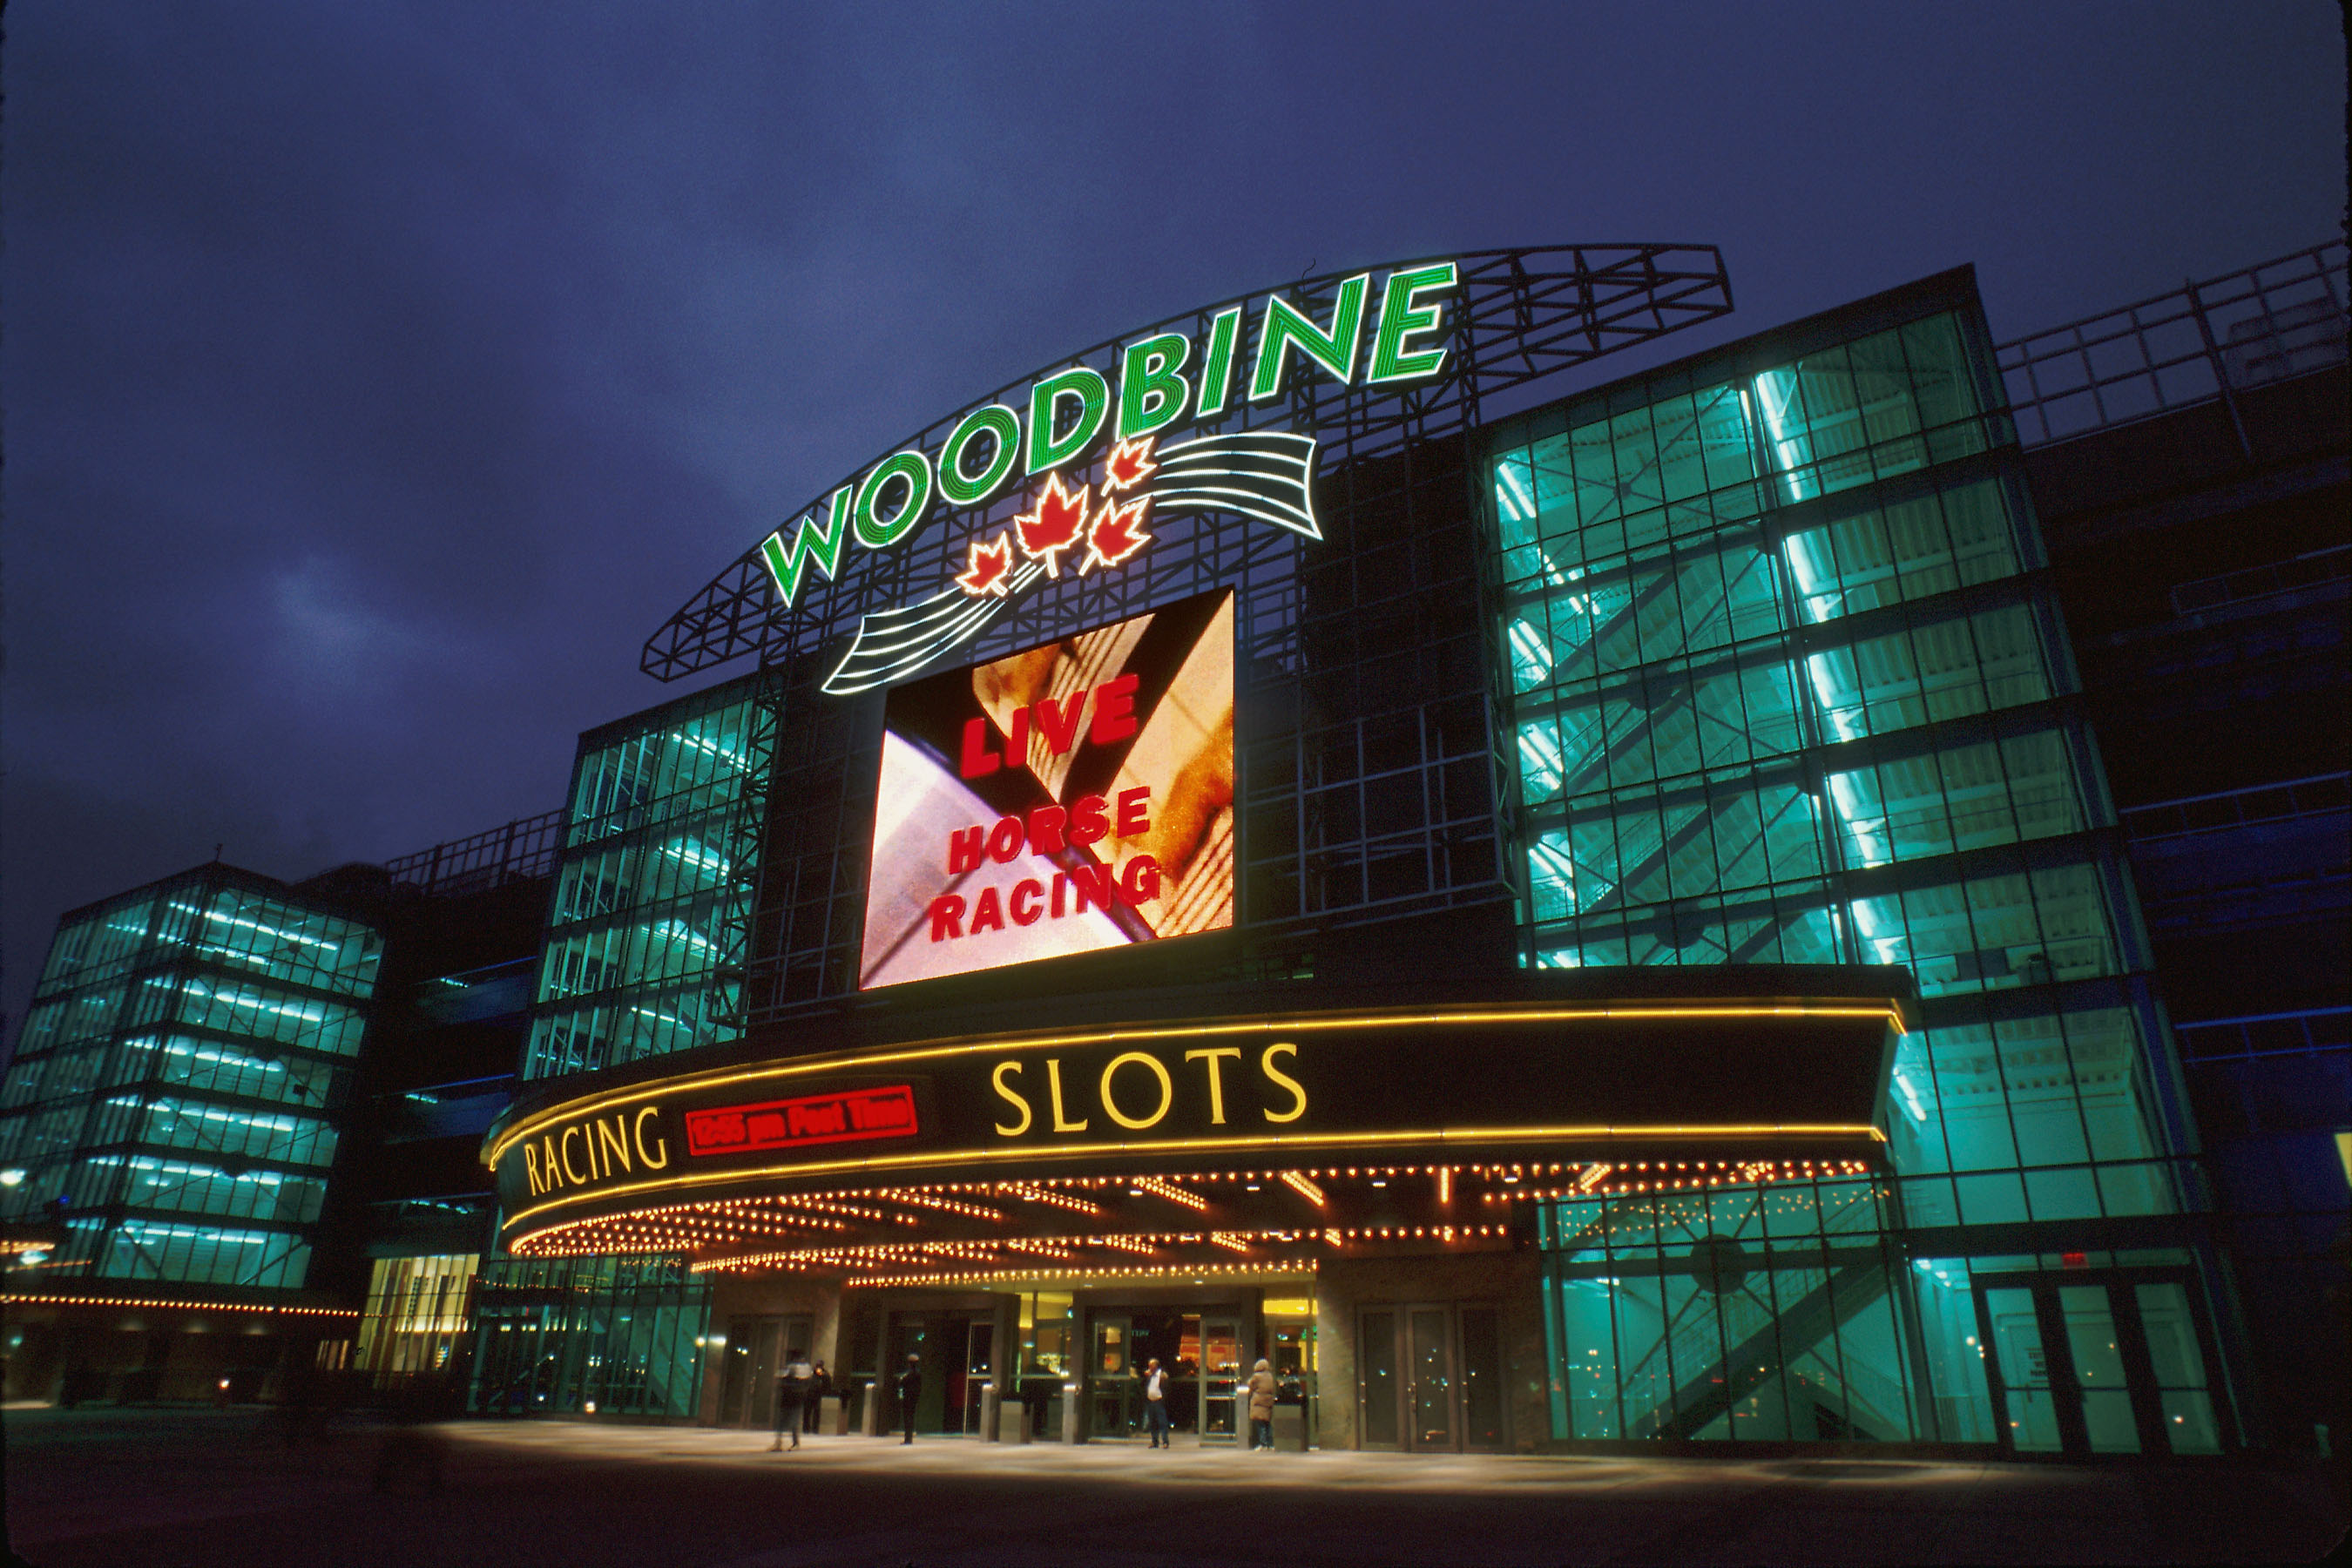 Woodbine Casino Expansion Date